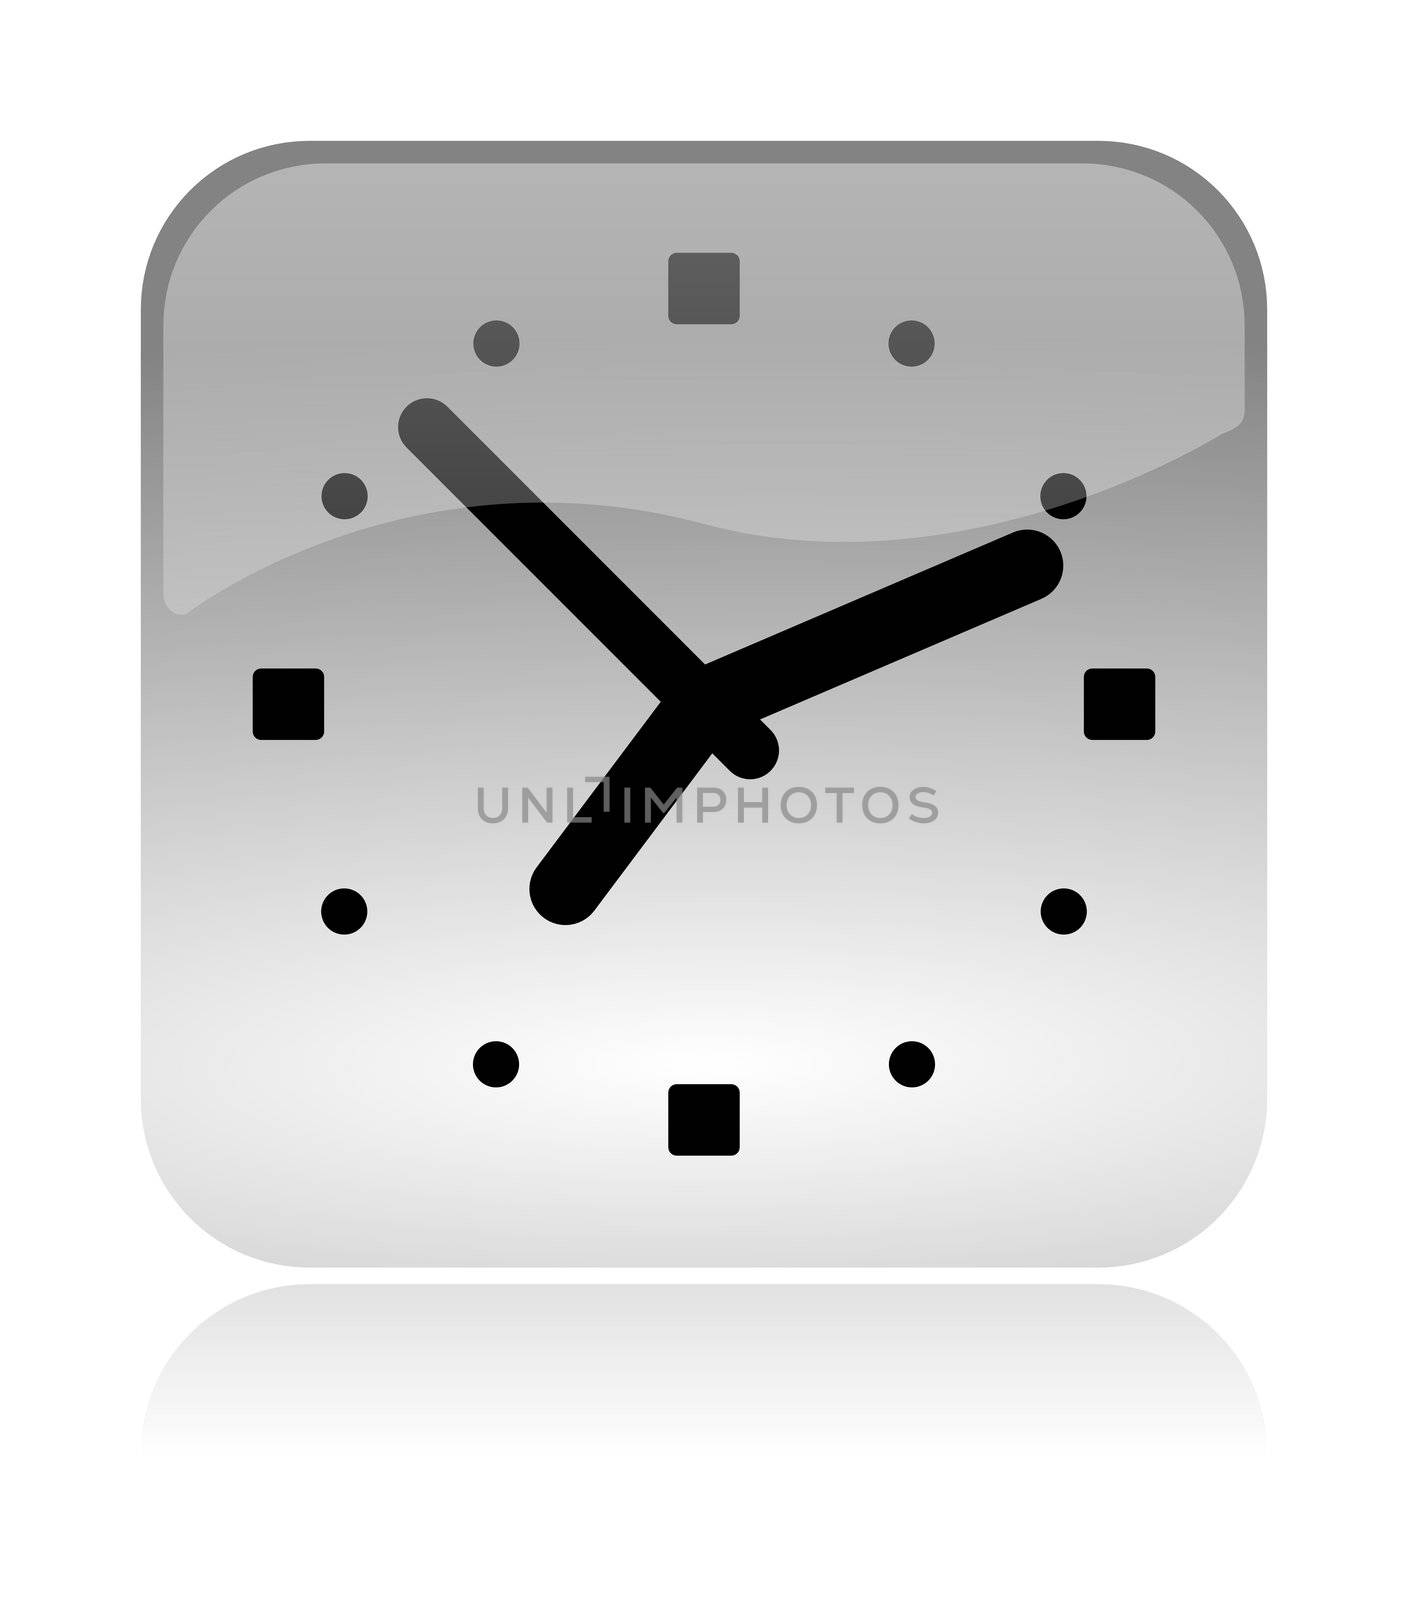 Analog clock time white, transparent and glossy web interface icon with reflection